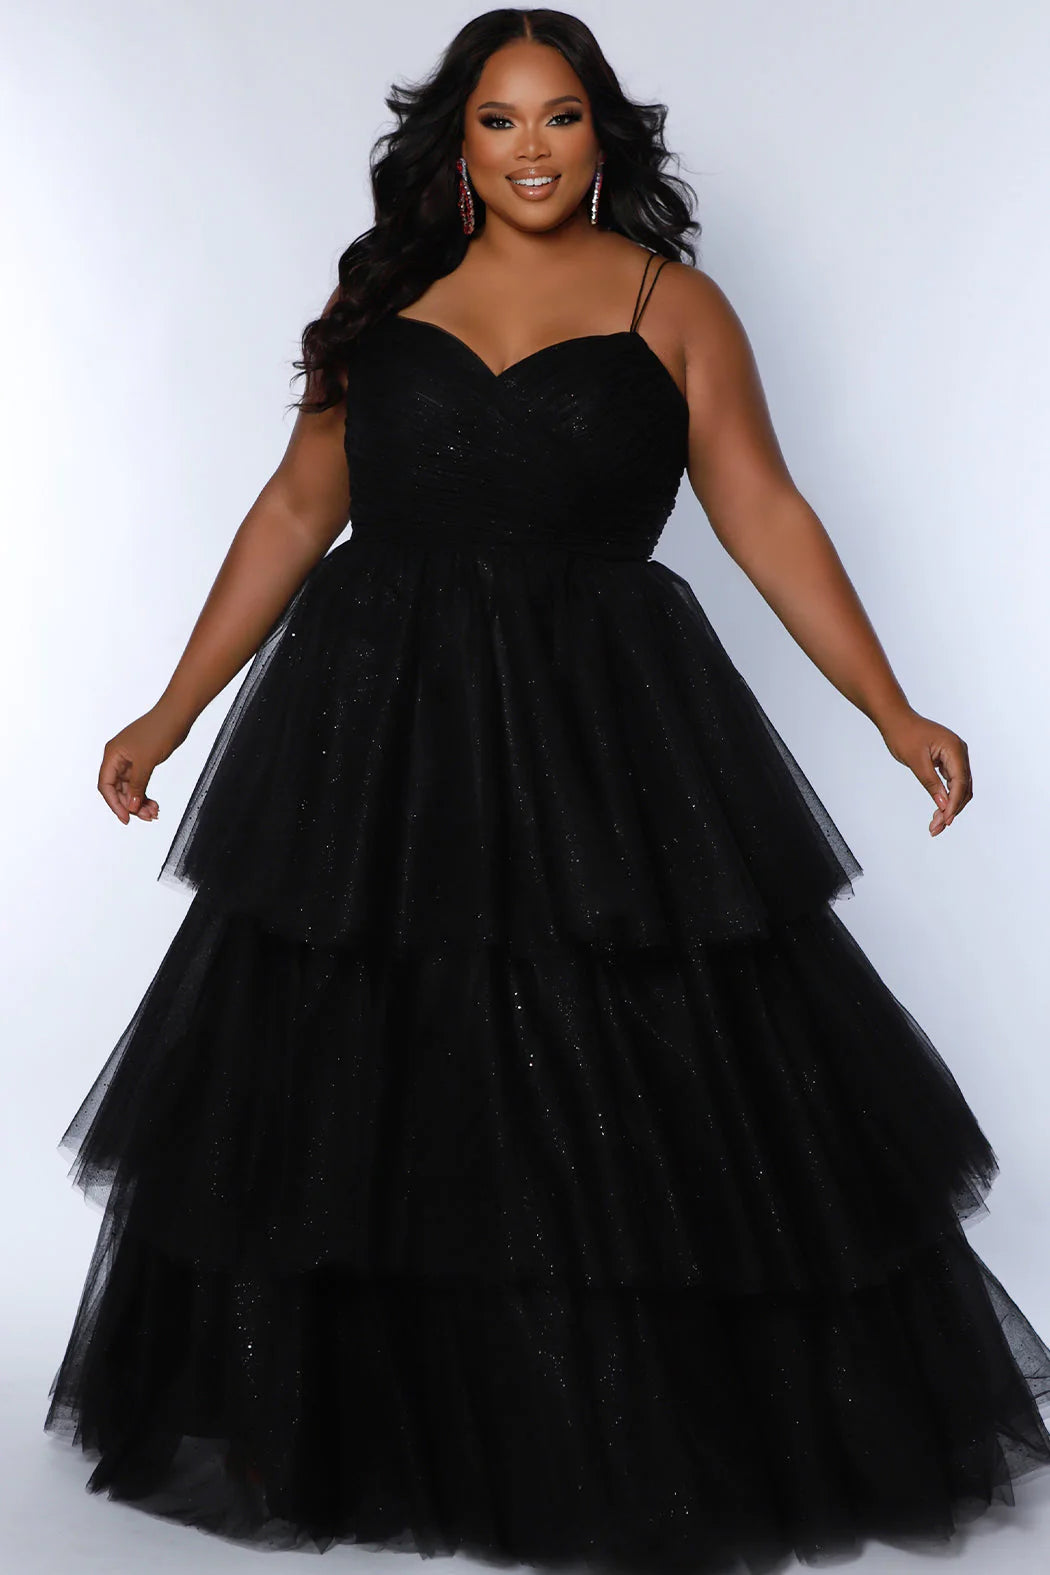 Plus Size Formal Dresses That Will Fit And Flatter